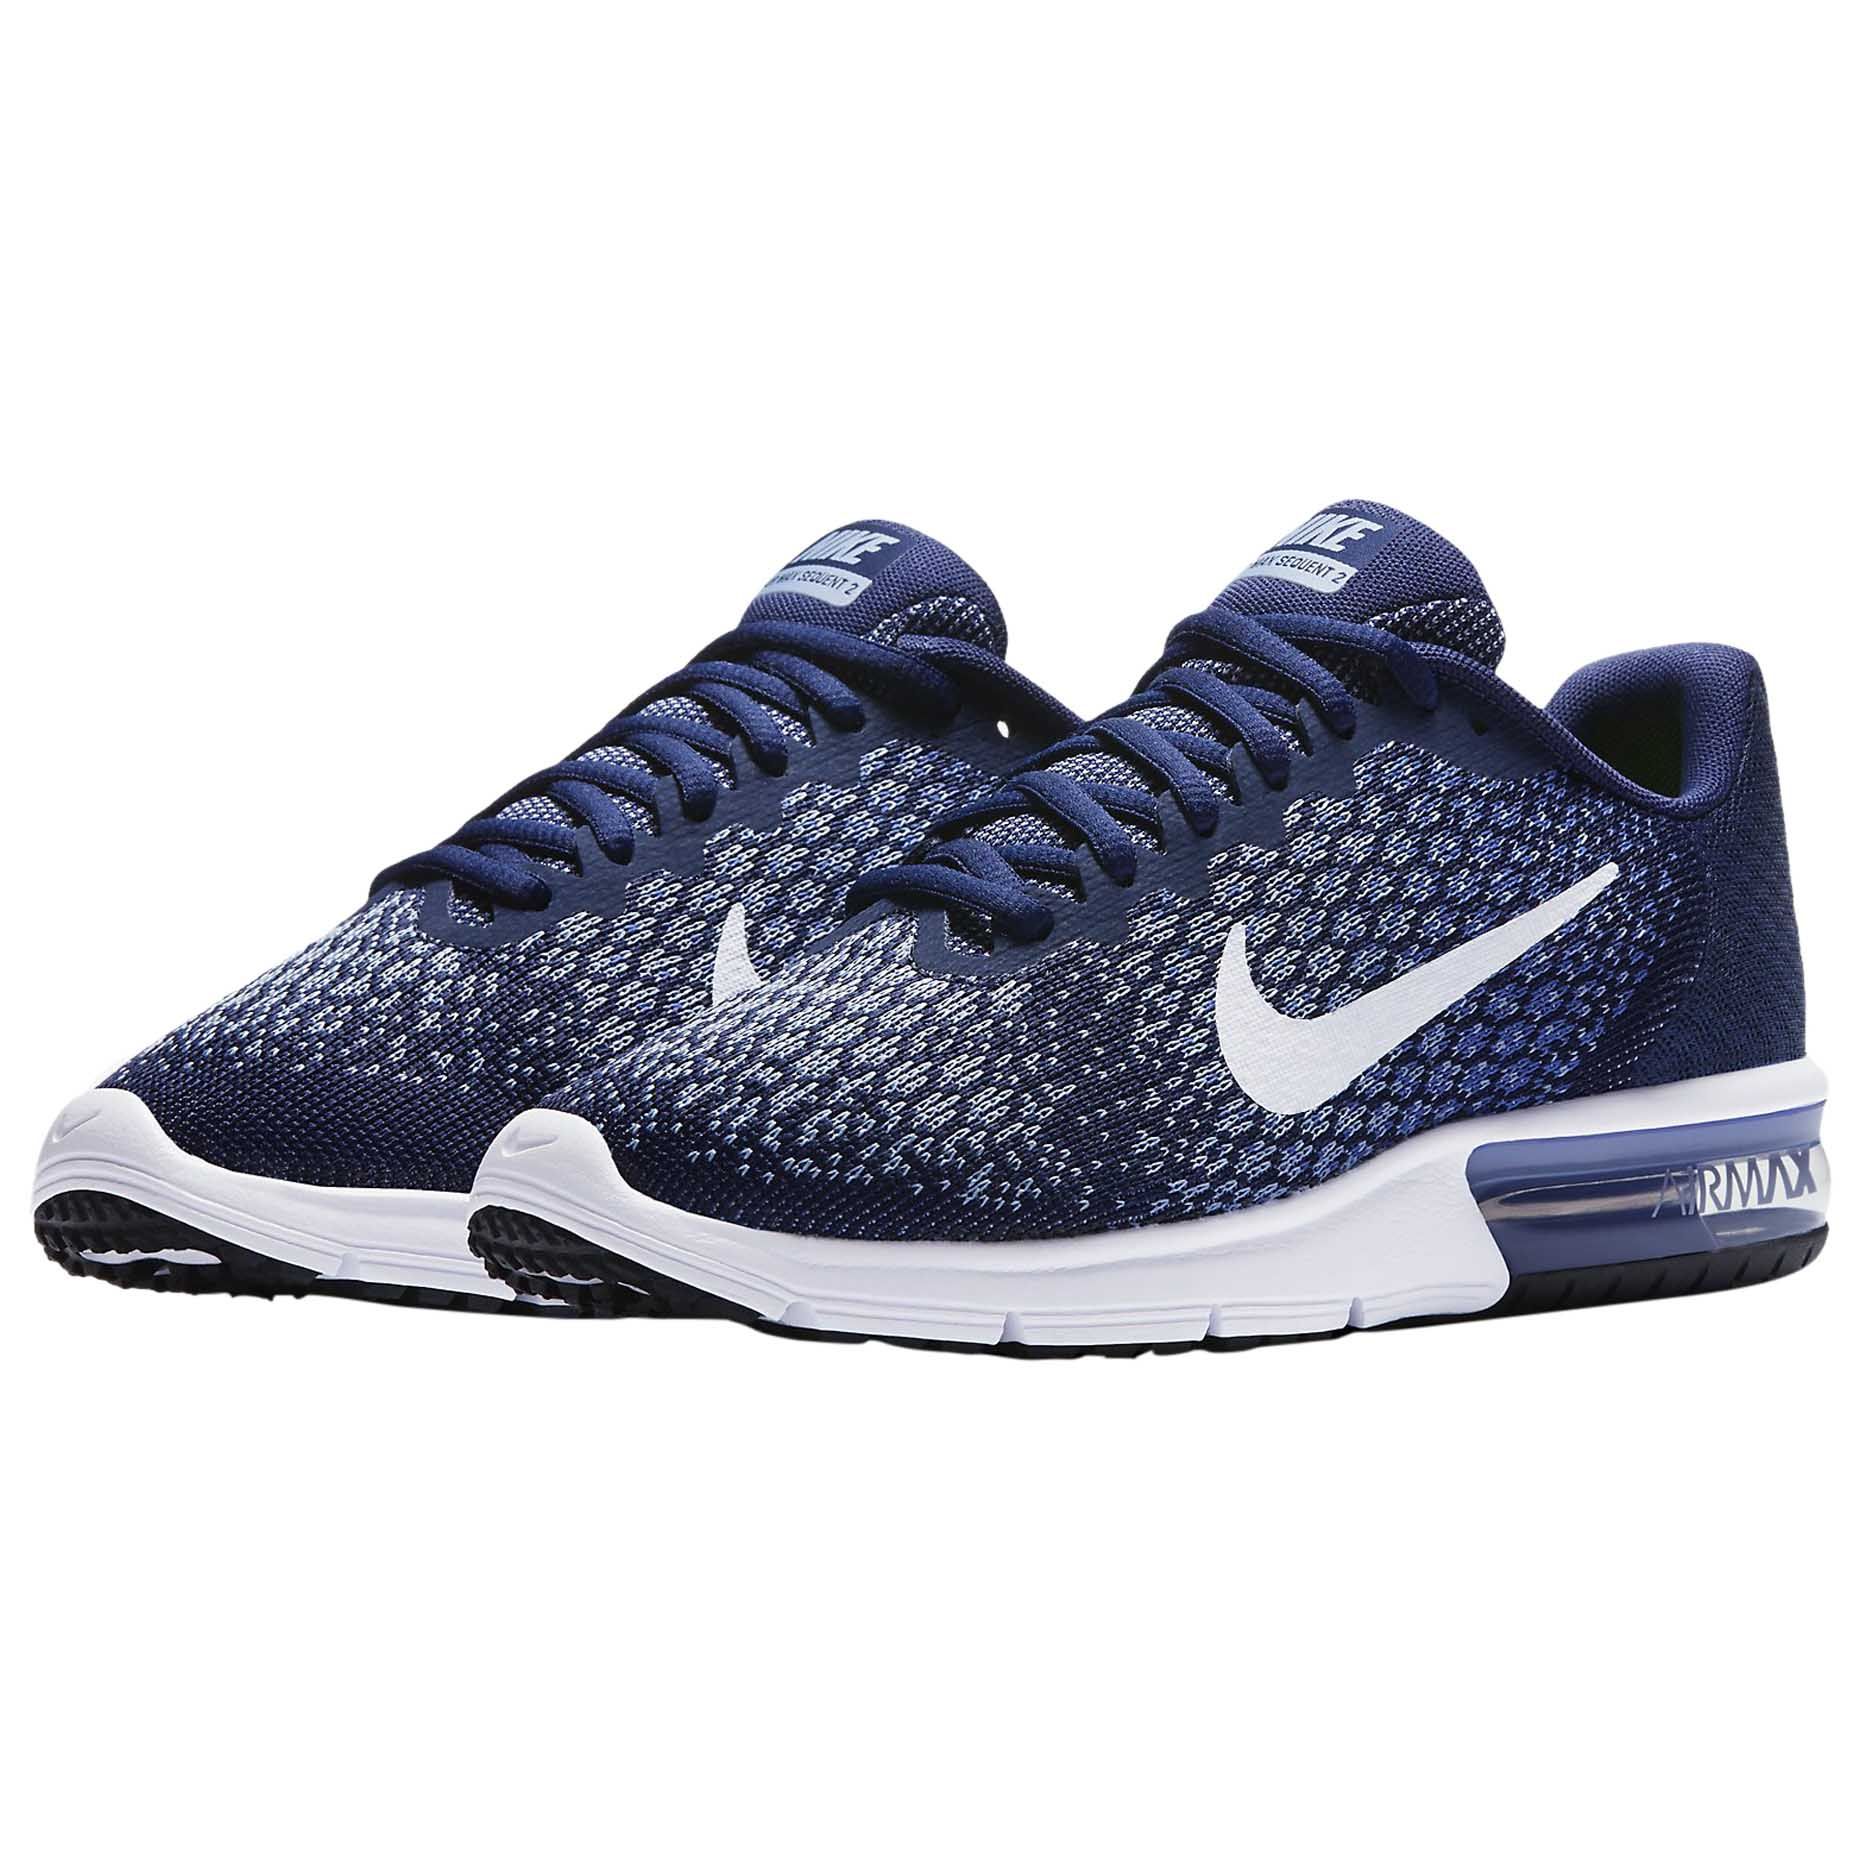 nike air max sequent 2 women's running shoe